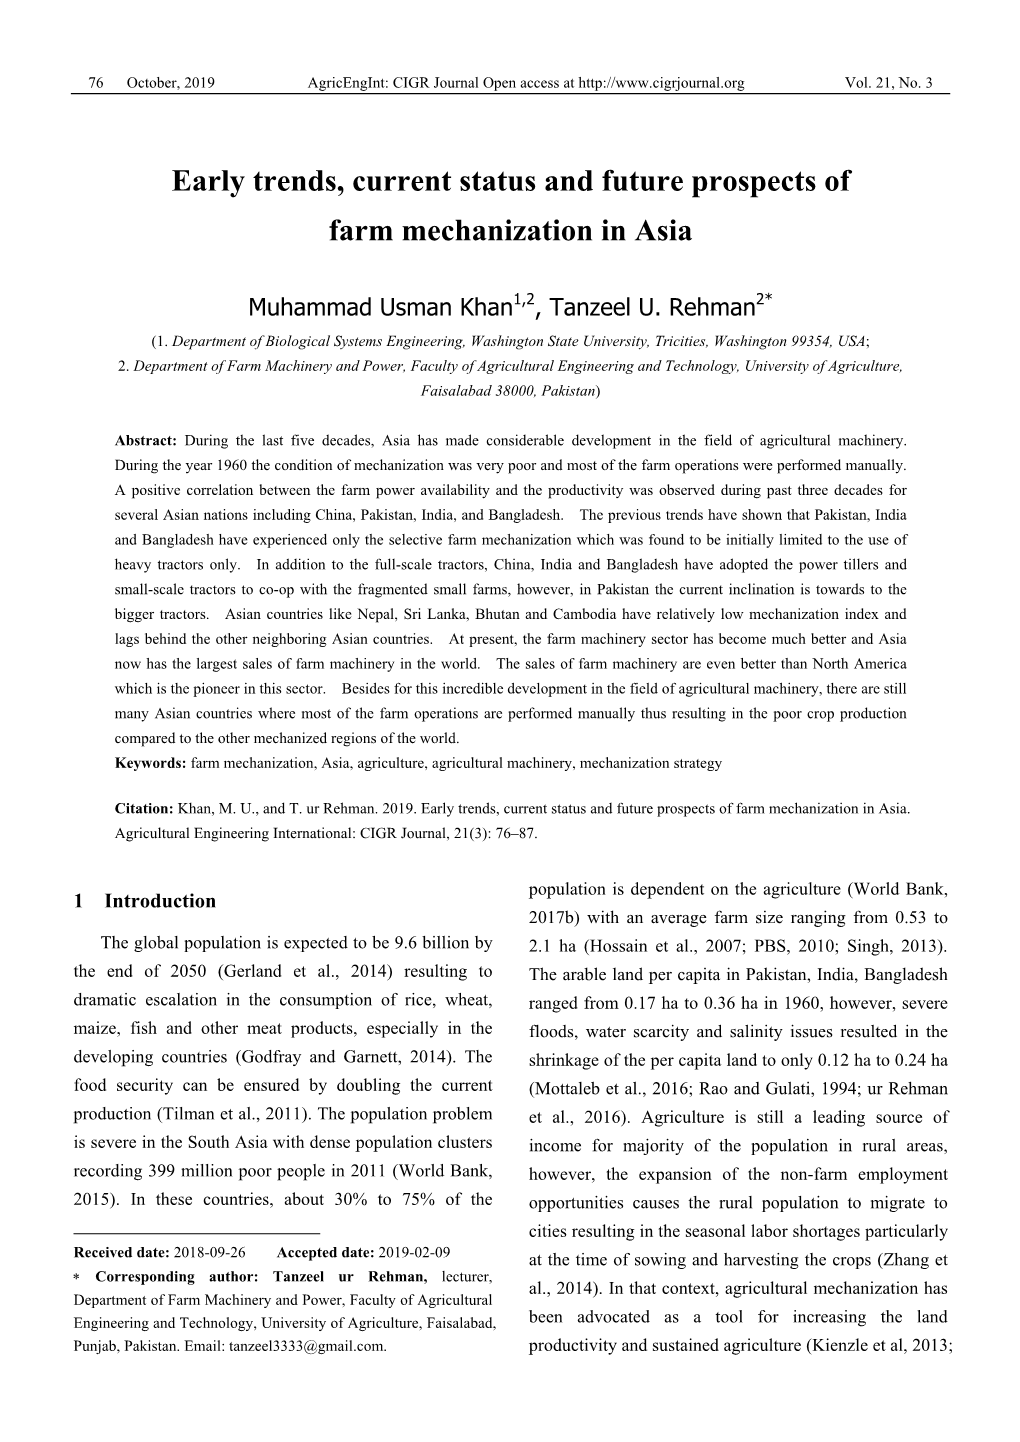 Early Trends, Current Status and Future Prospects of Farm Mechanization in Asia